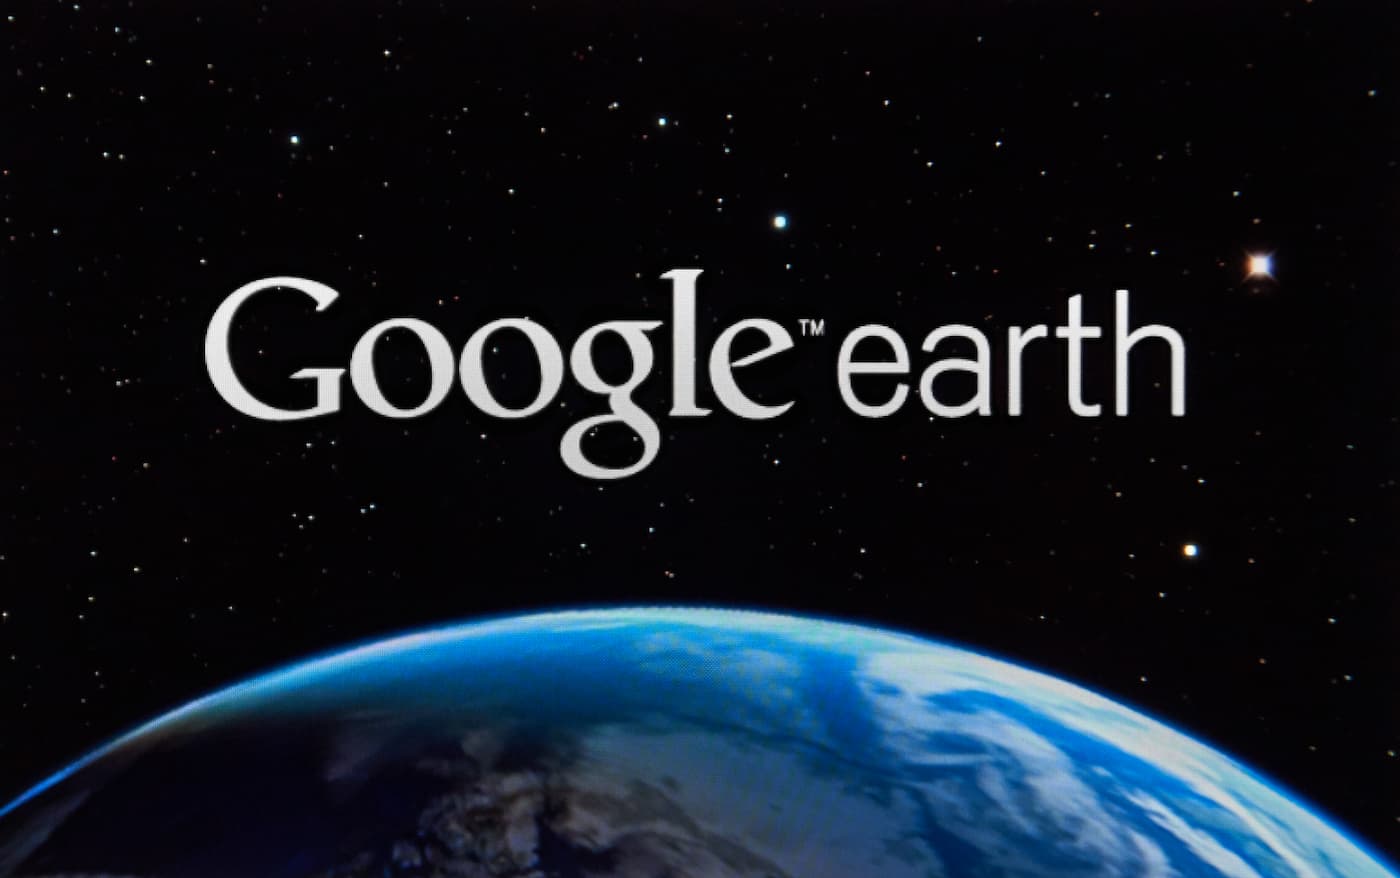 An image of Earth from Space with text overlay reading "Google earth"